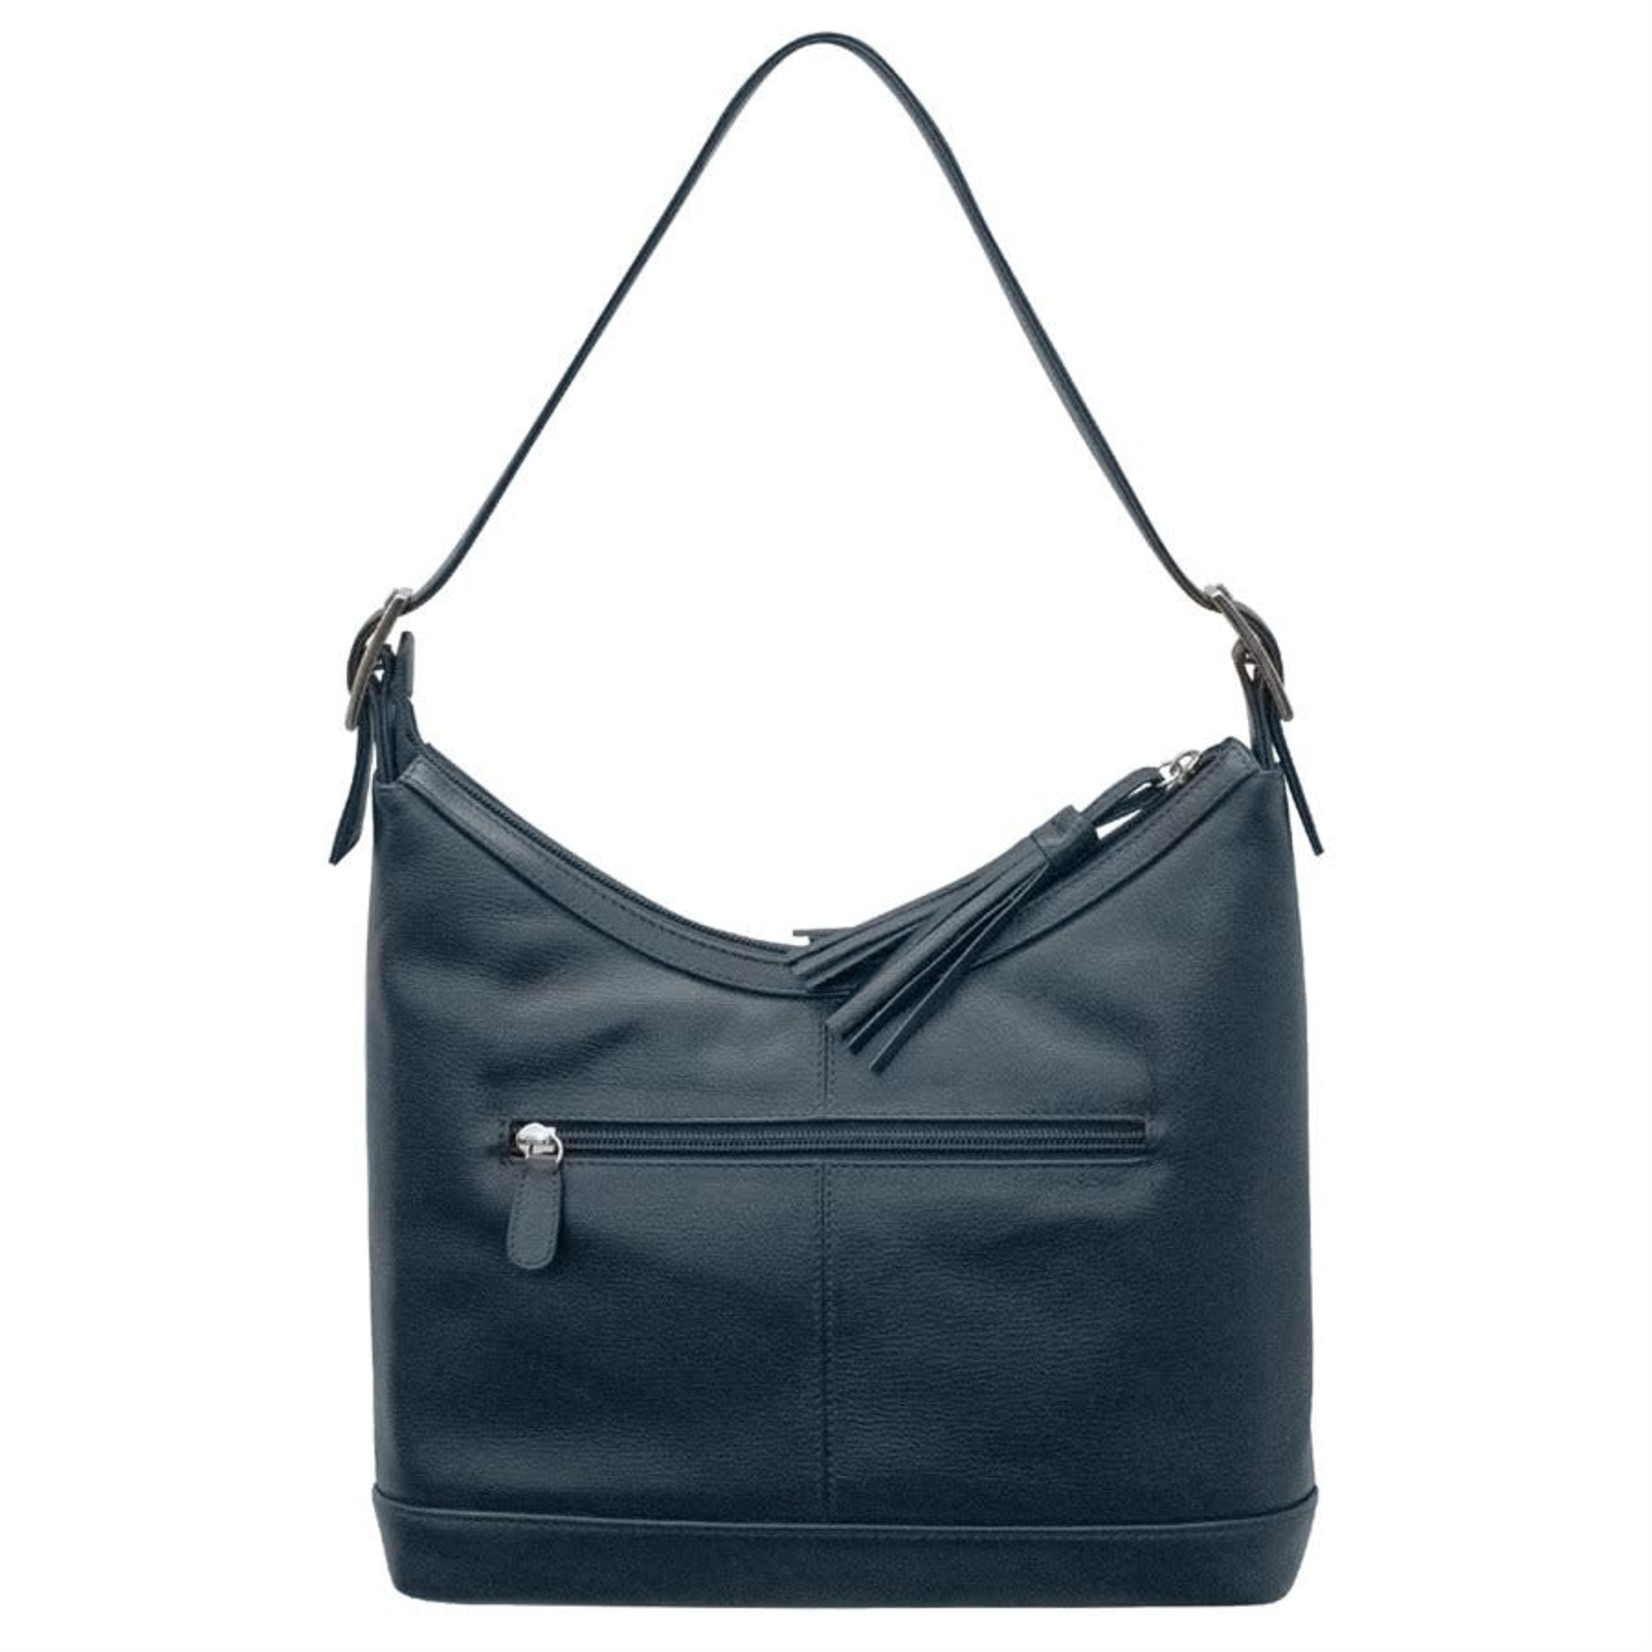 Leather Handbags and Accessories 6924 Navy - Classic Leather Hobo